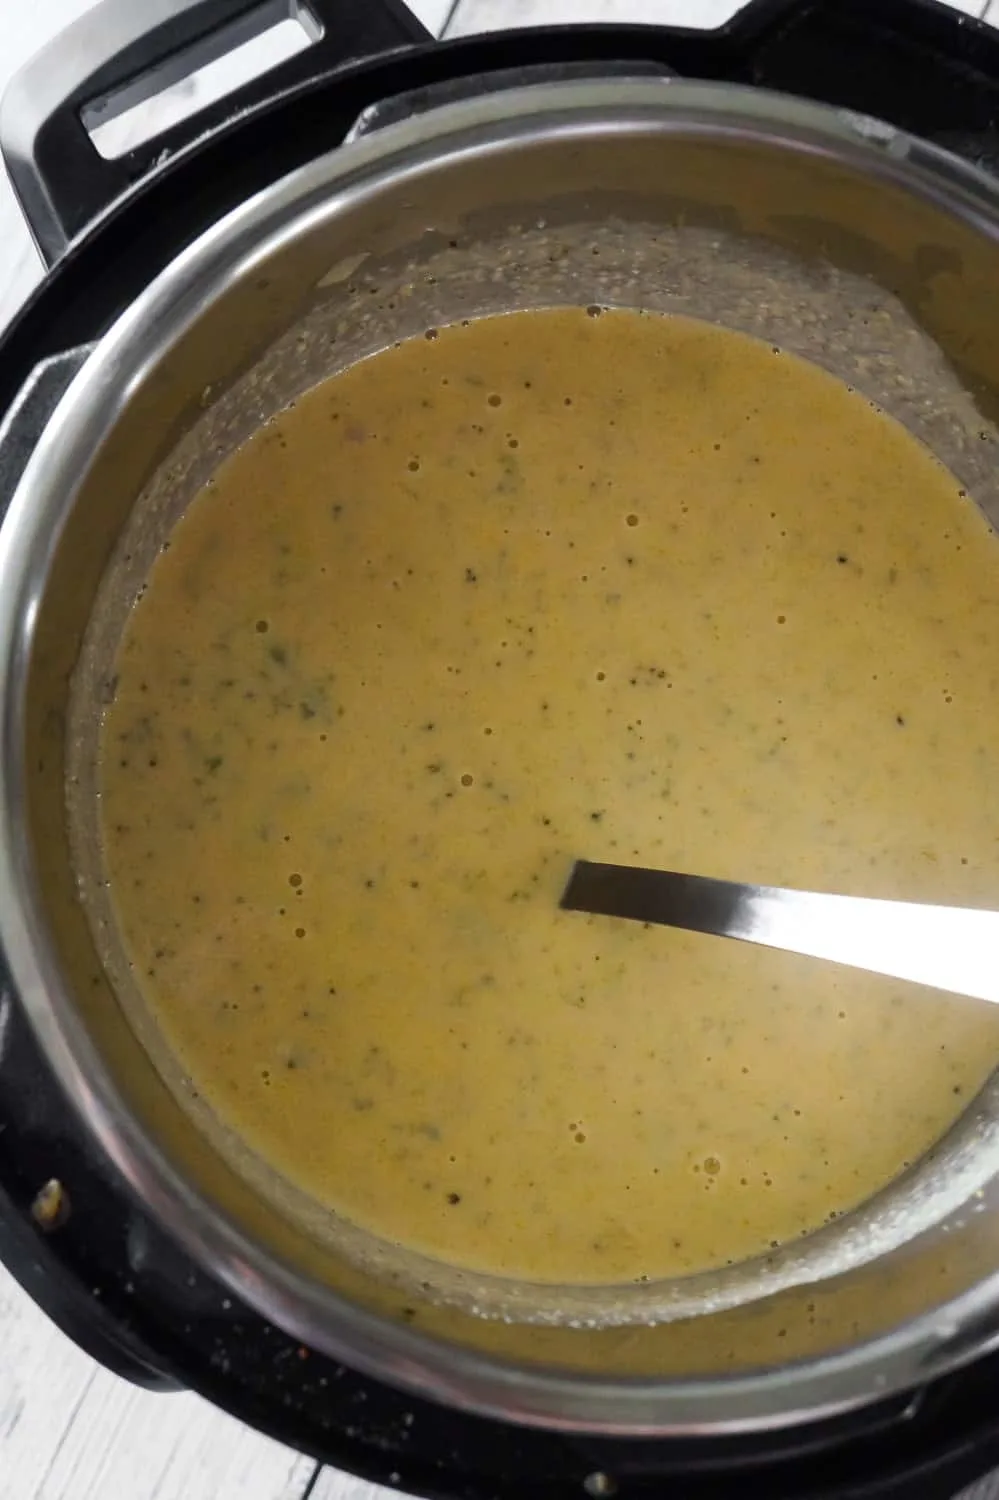 Instant Pot Broccoli Cheese Soup with Chicken is an easy pressure cooker soup recipe loaded with chunks of chicken, broccoli and cheddar cheese.